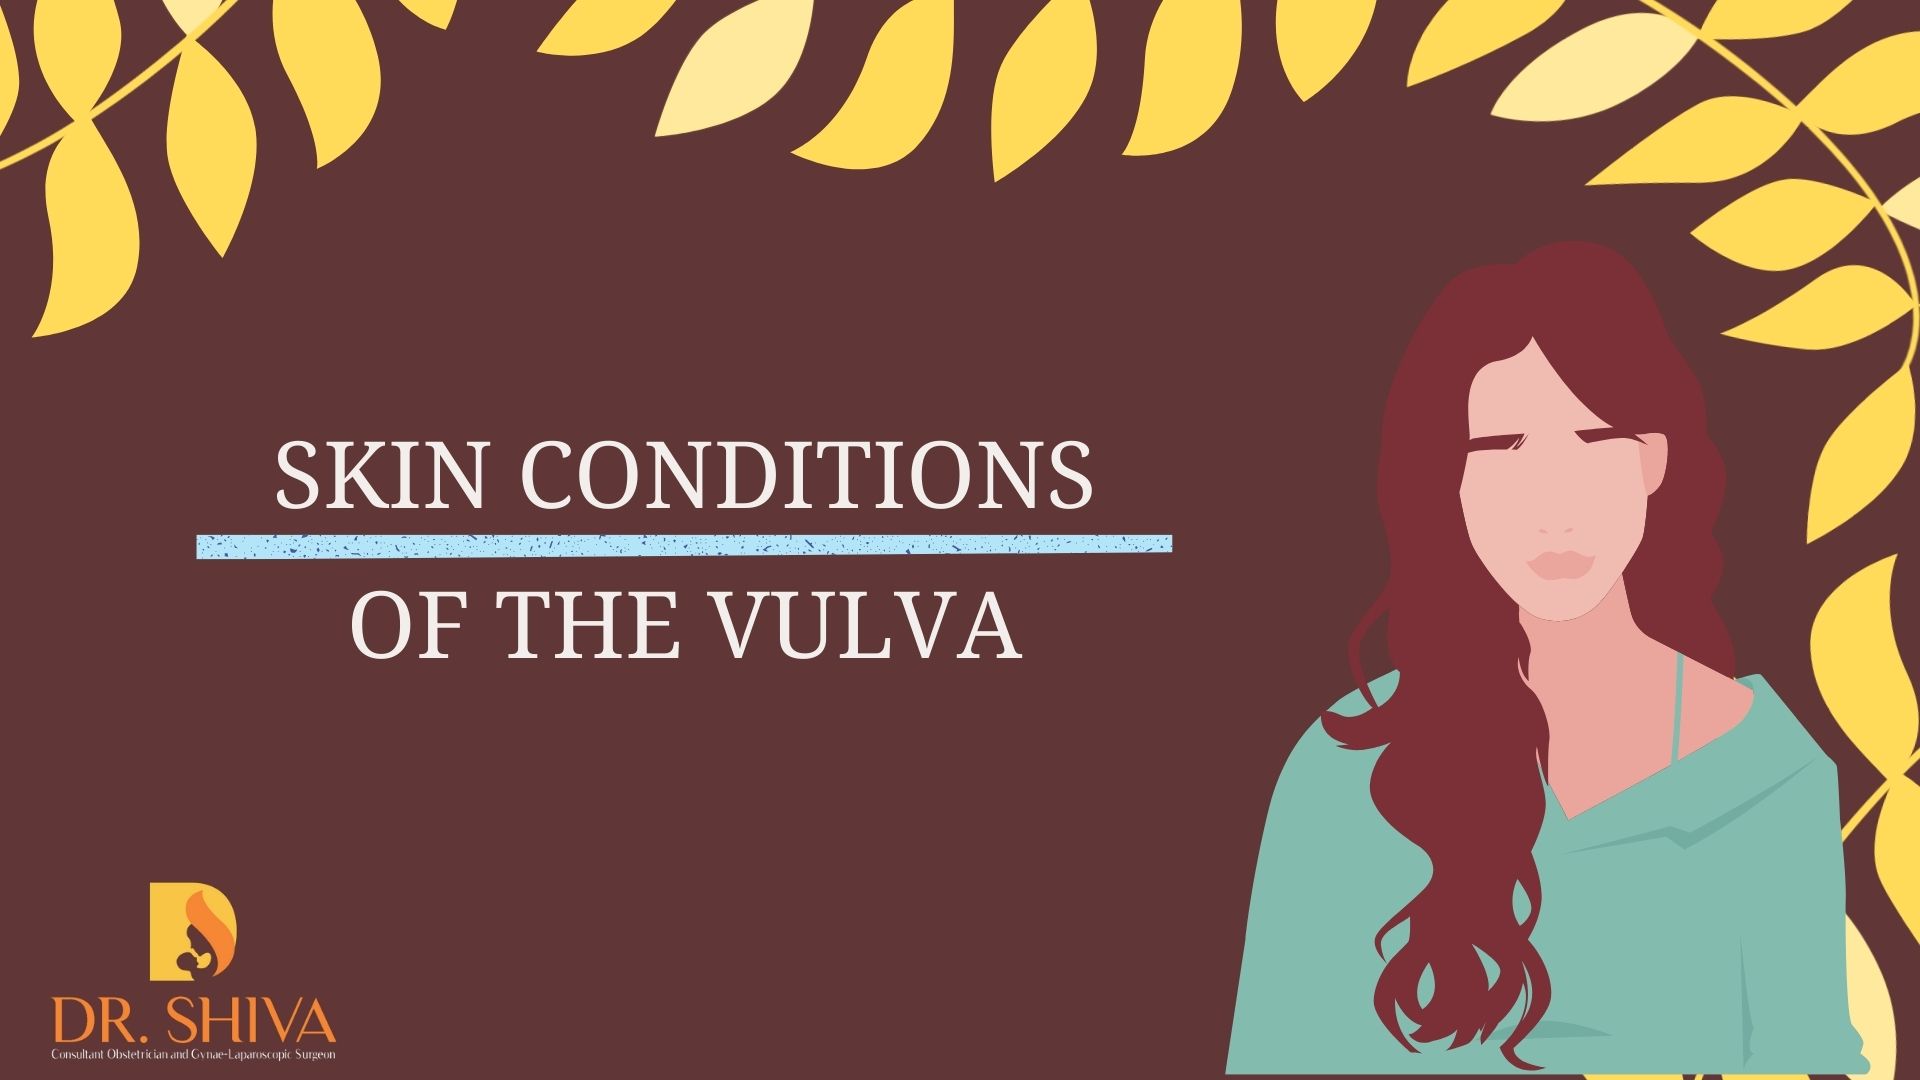 Skin conditions of the Vulva